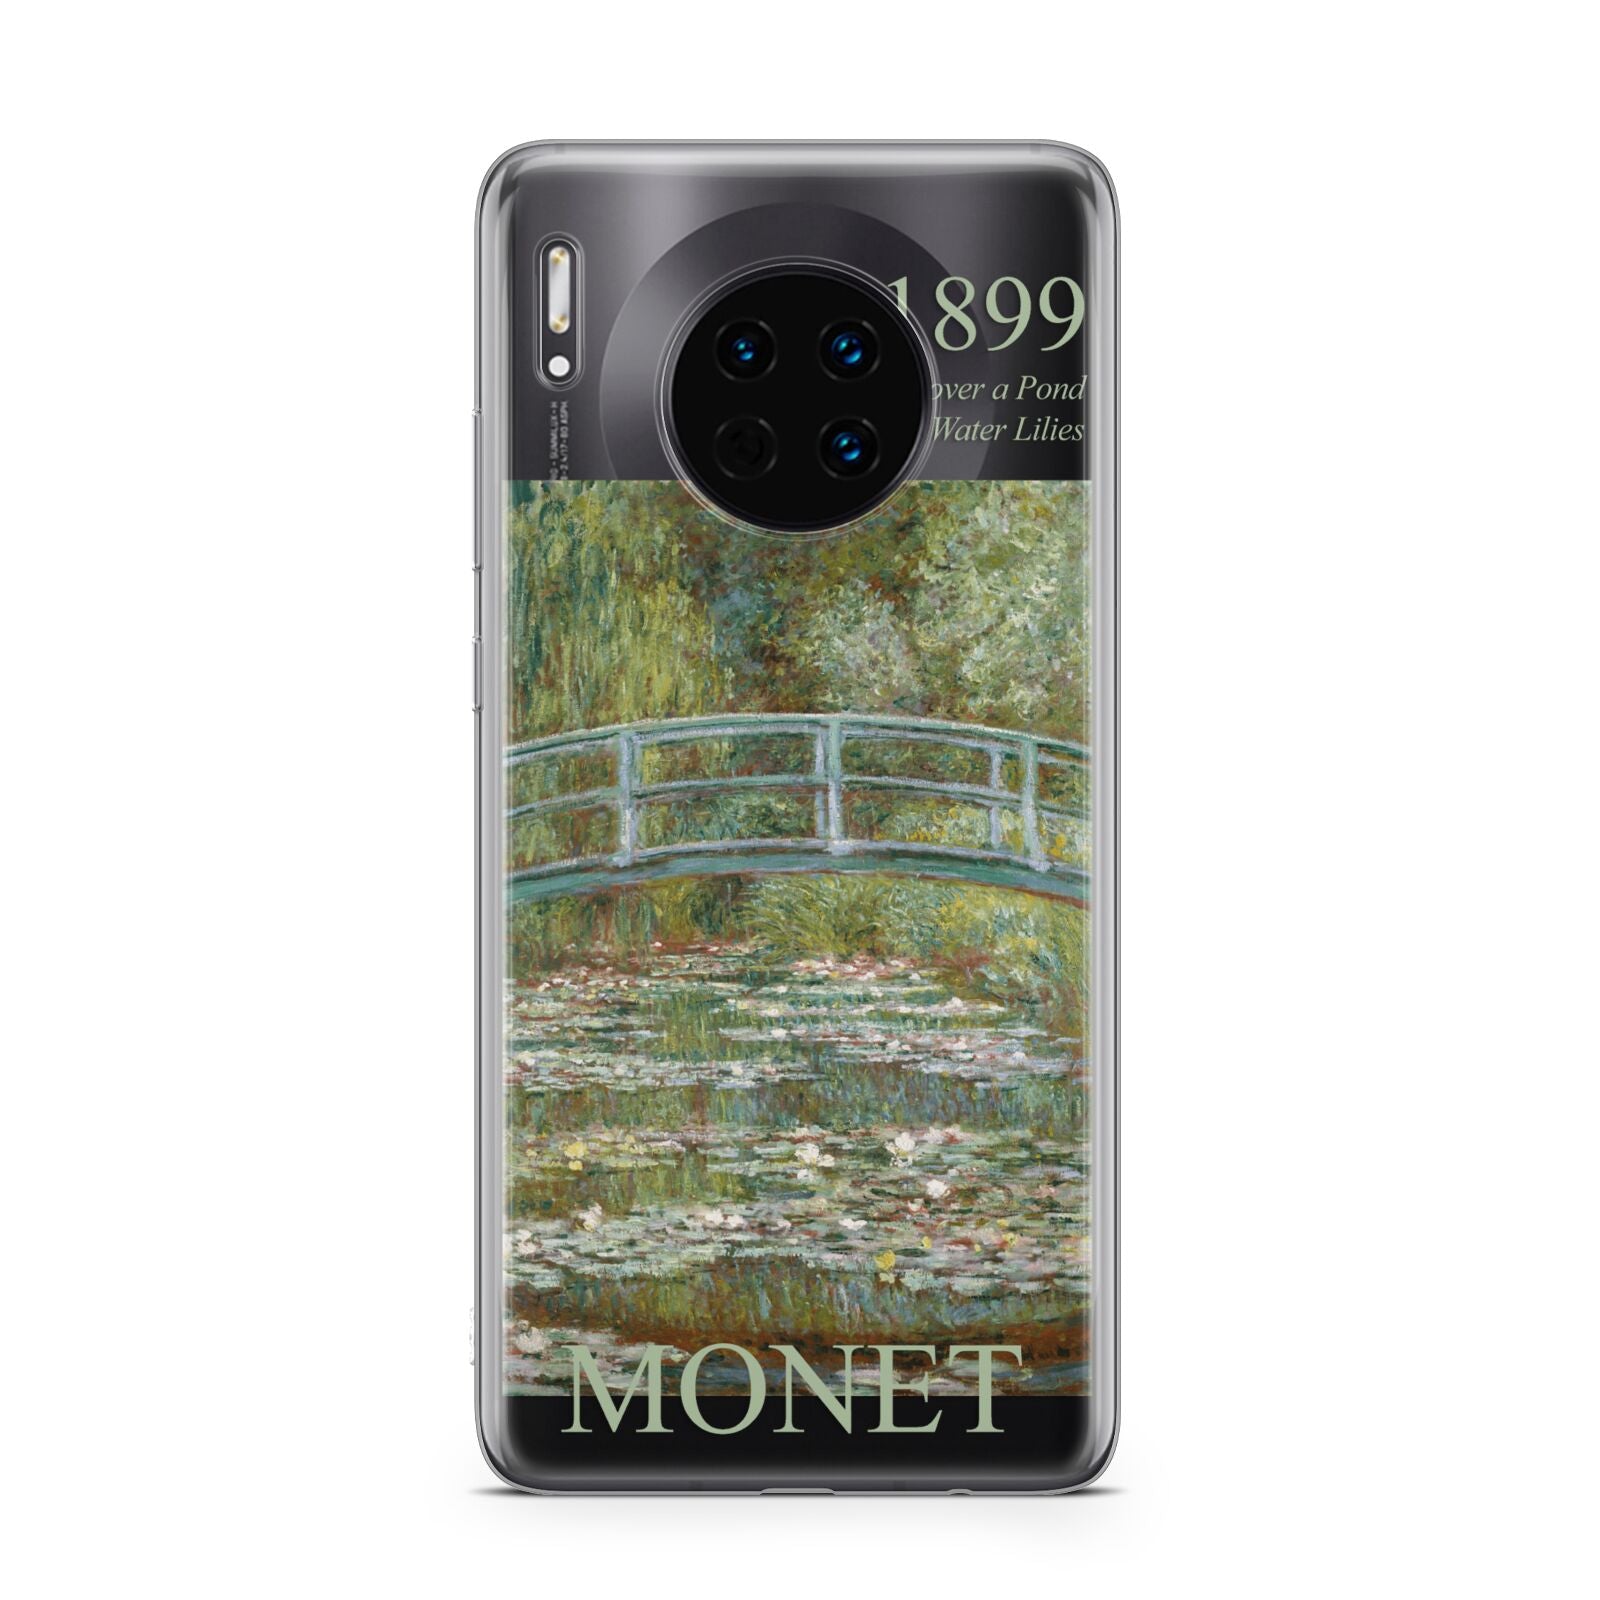 Bridge Over A Pond Of Water Lilies By Monet Huawei Mate 30